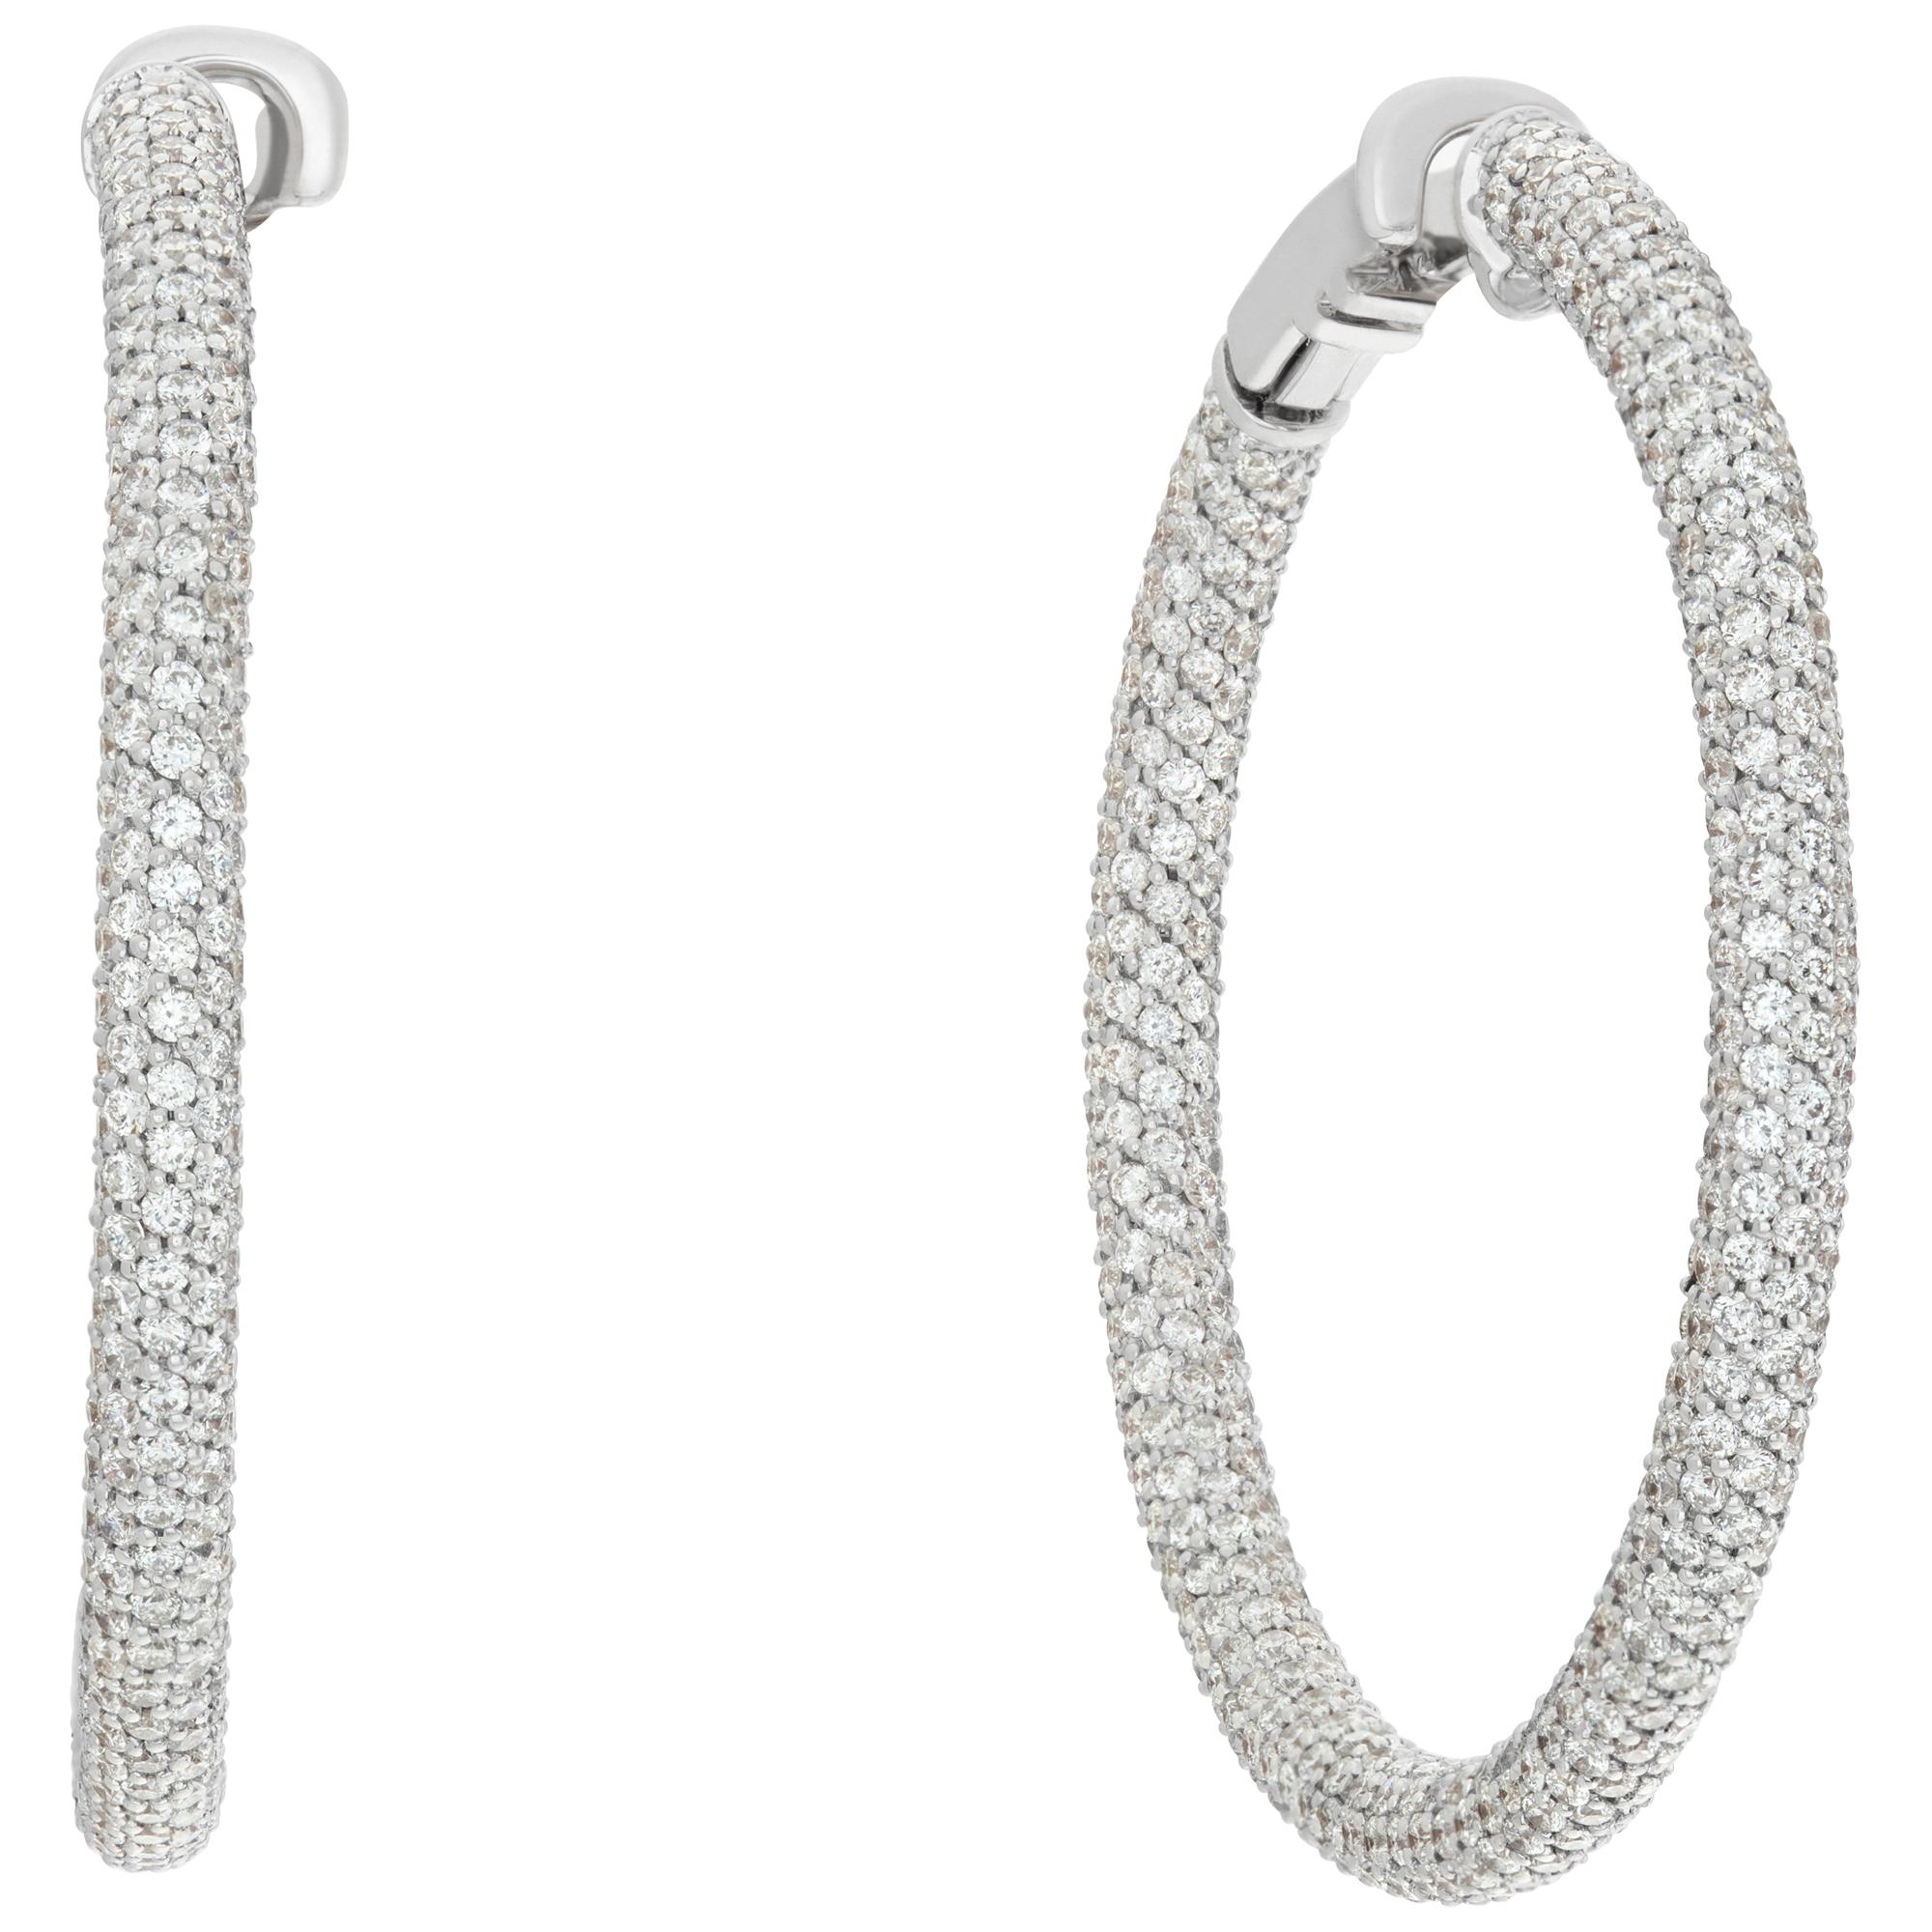 Stunning 18k white gold pave diamond hoop earrings with 6.90 carats in round brilliant diamonds G-H Color, VVS Clarity. Hangs 1.6 inches, 3mm thick.
